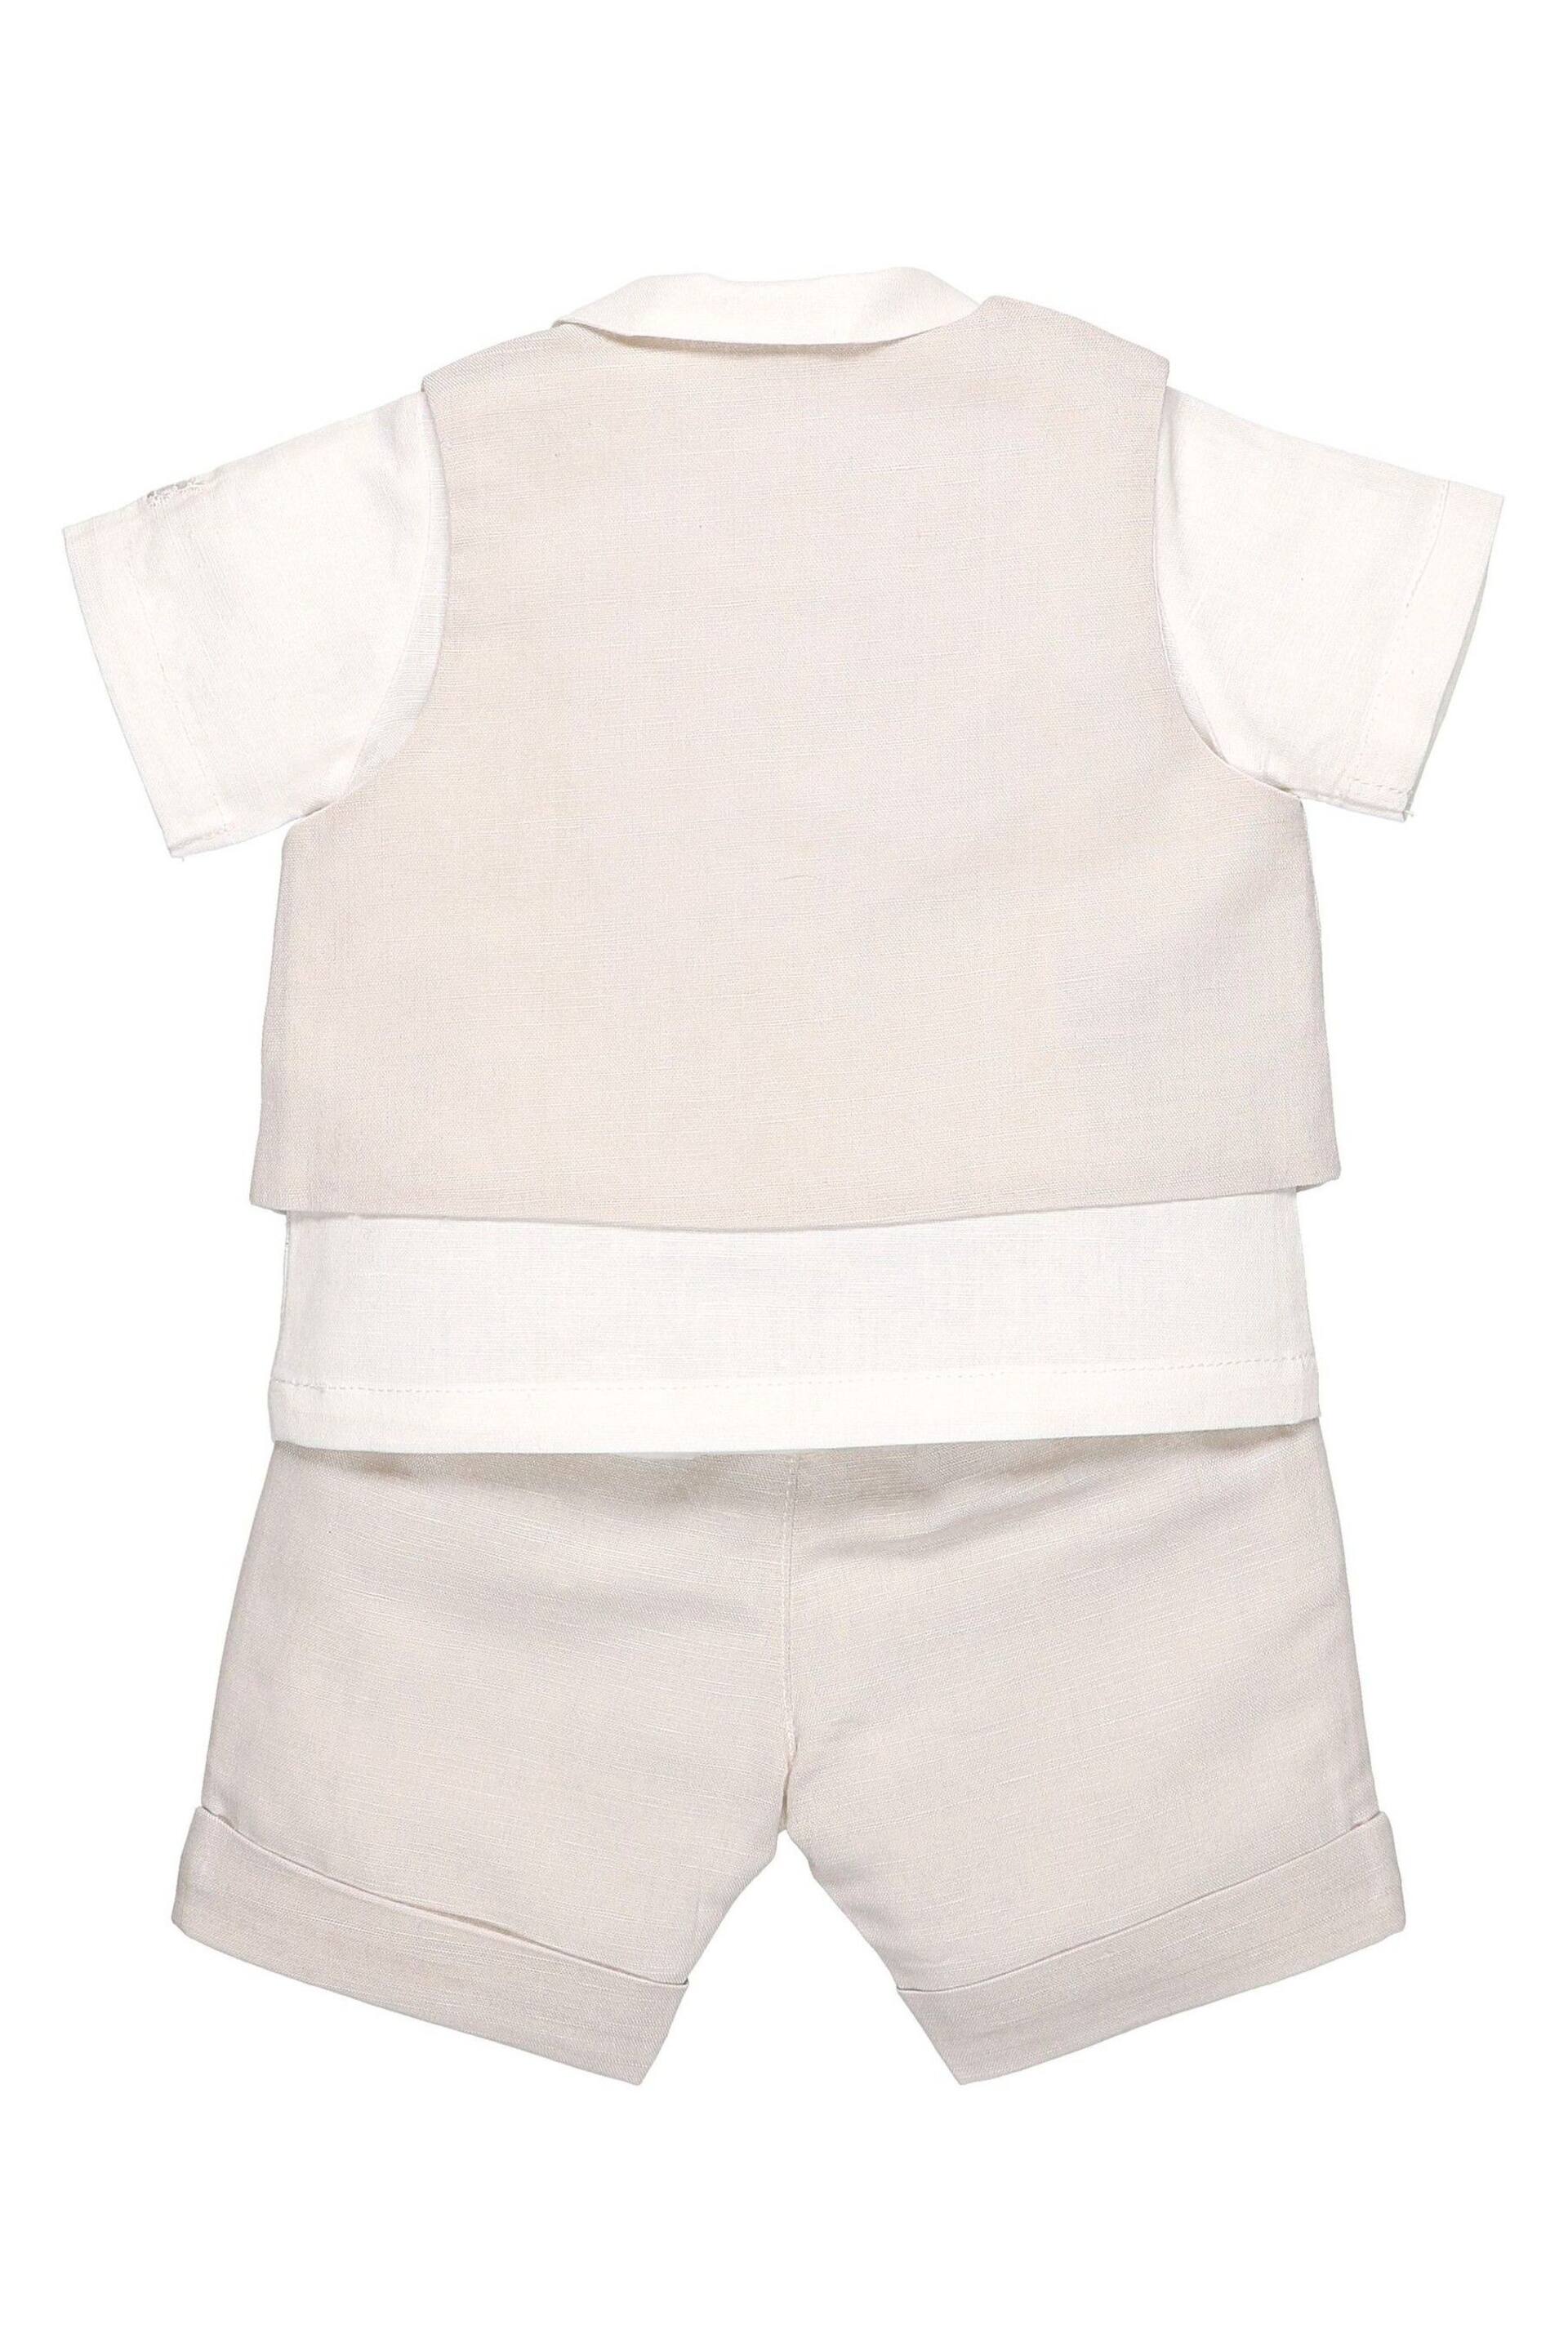 Emile et Rose Natural Three-Piece Linen Shorts And Hat Set - Image 3 of 3